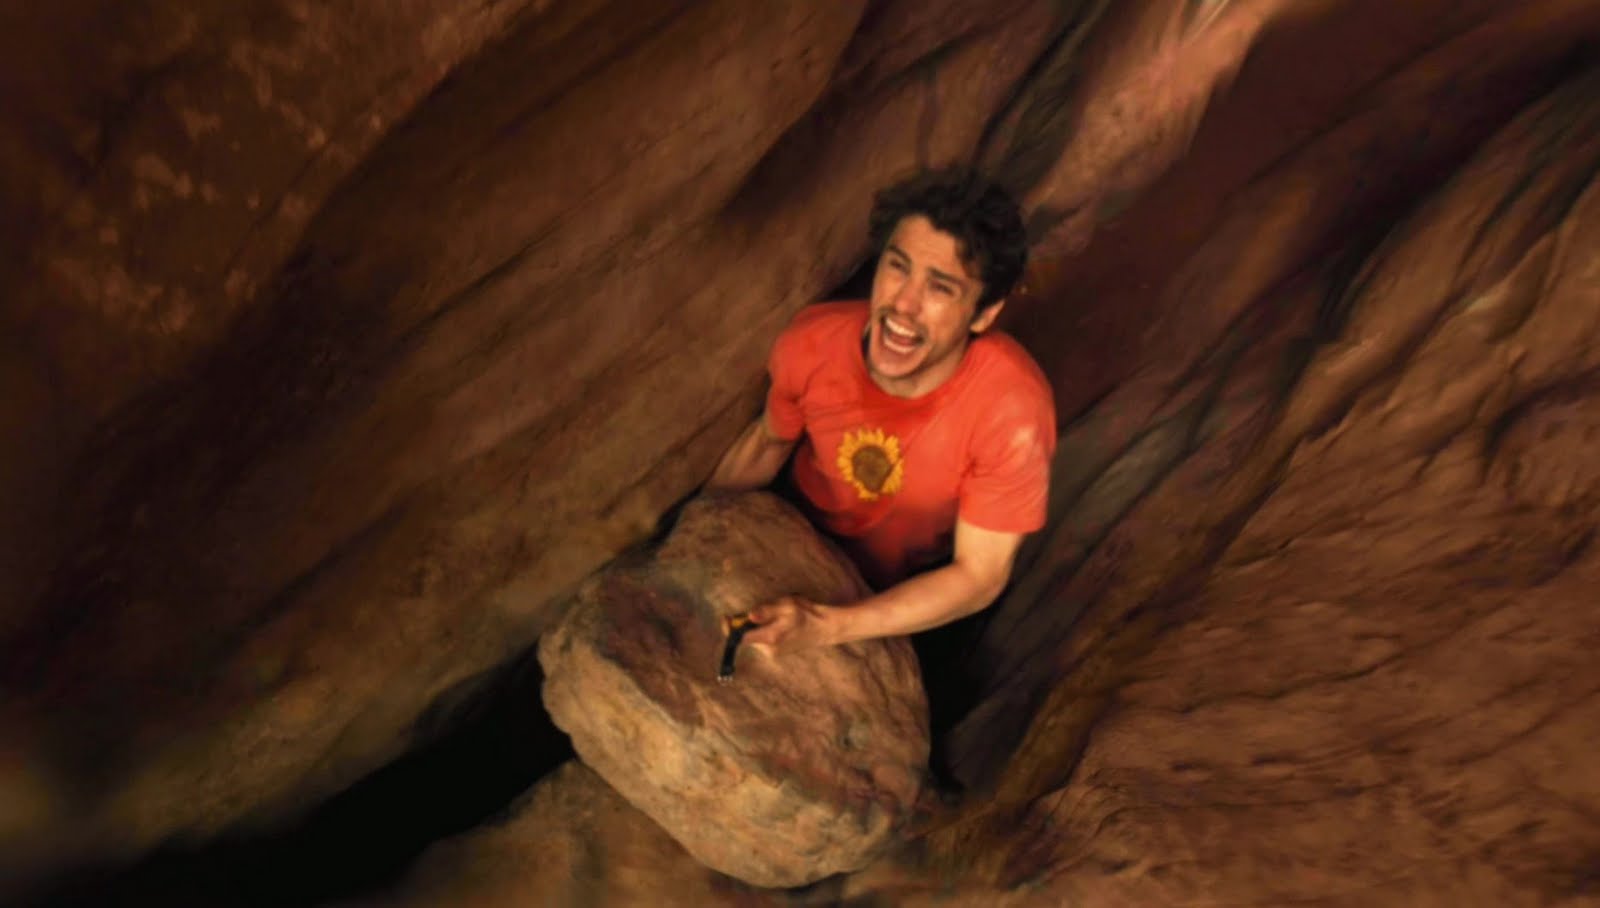 127 Hours (2010):The Lighted